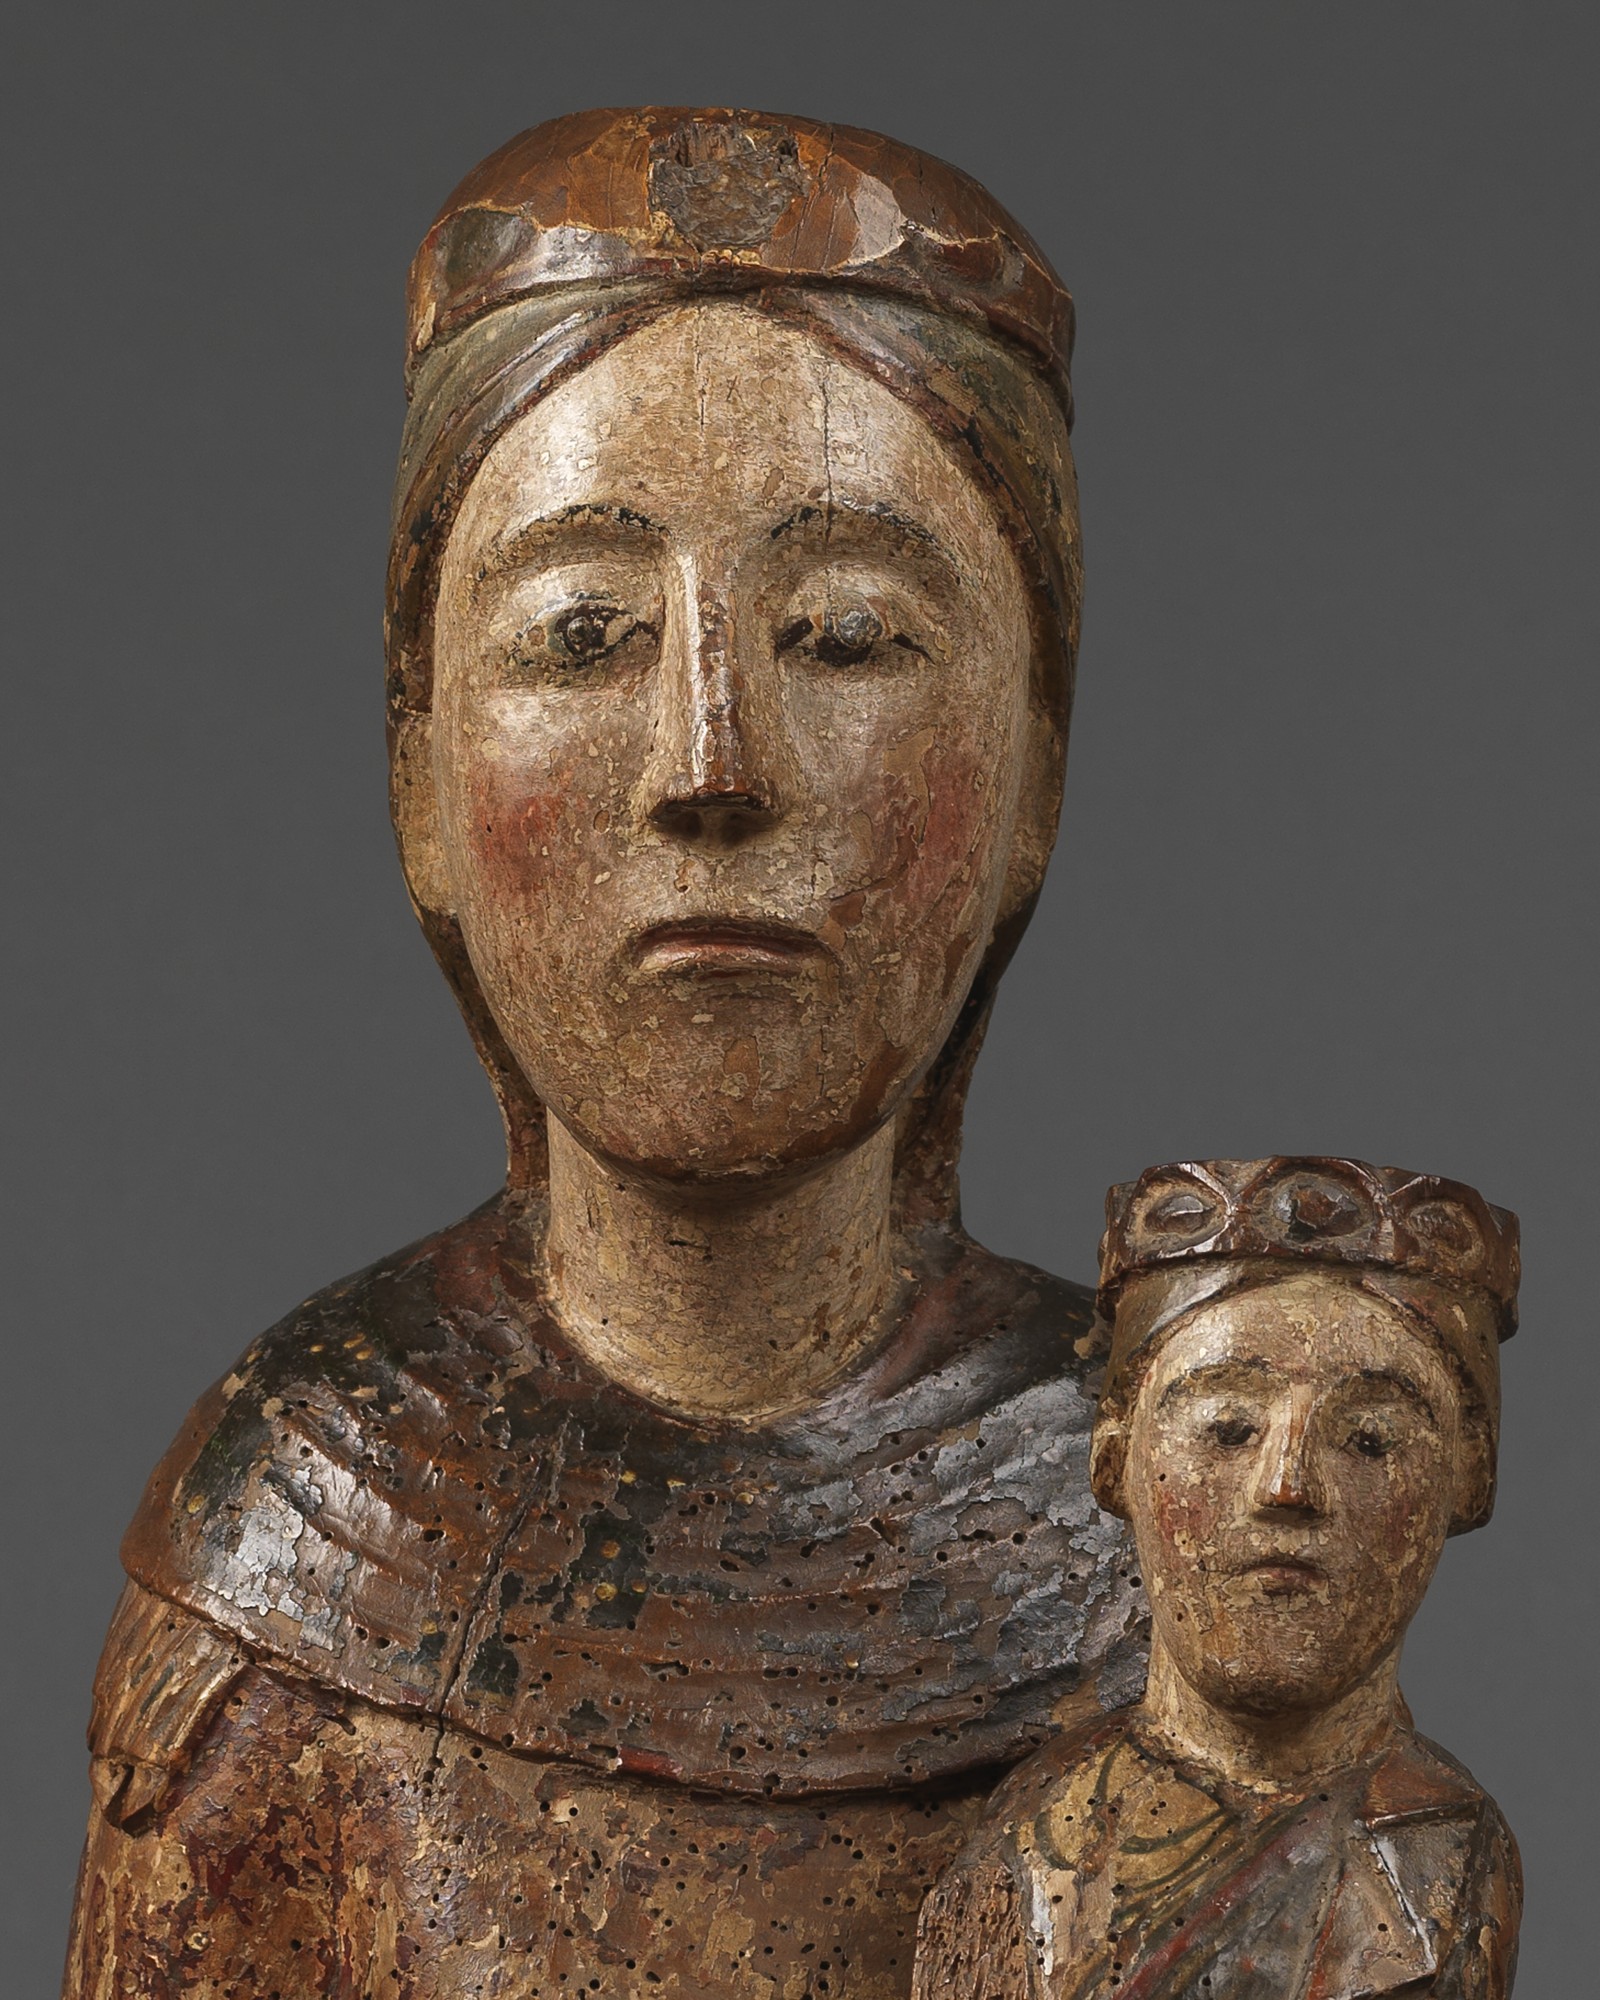 Enthroned Virgin and Child, Sedes Sapientiae, Eastern France, last quarter 12th century